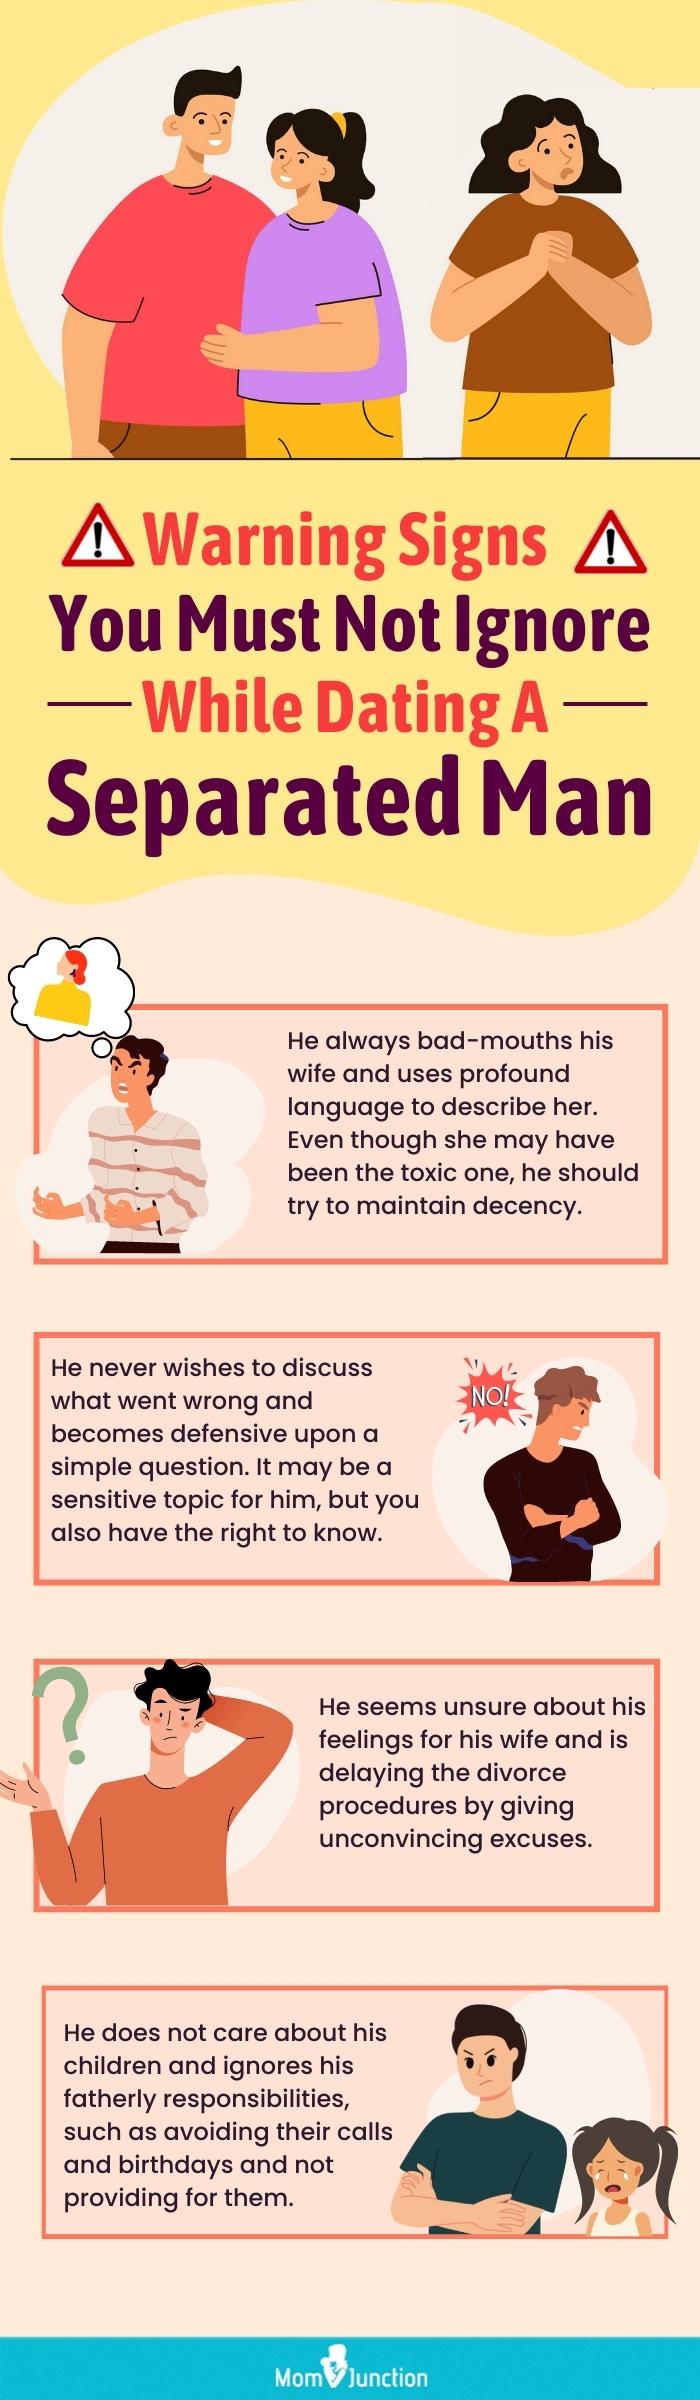 Dating A Separated Man 10 Things You Need To Know picture